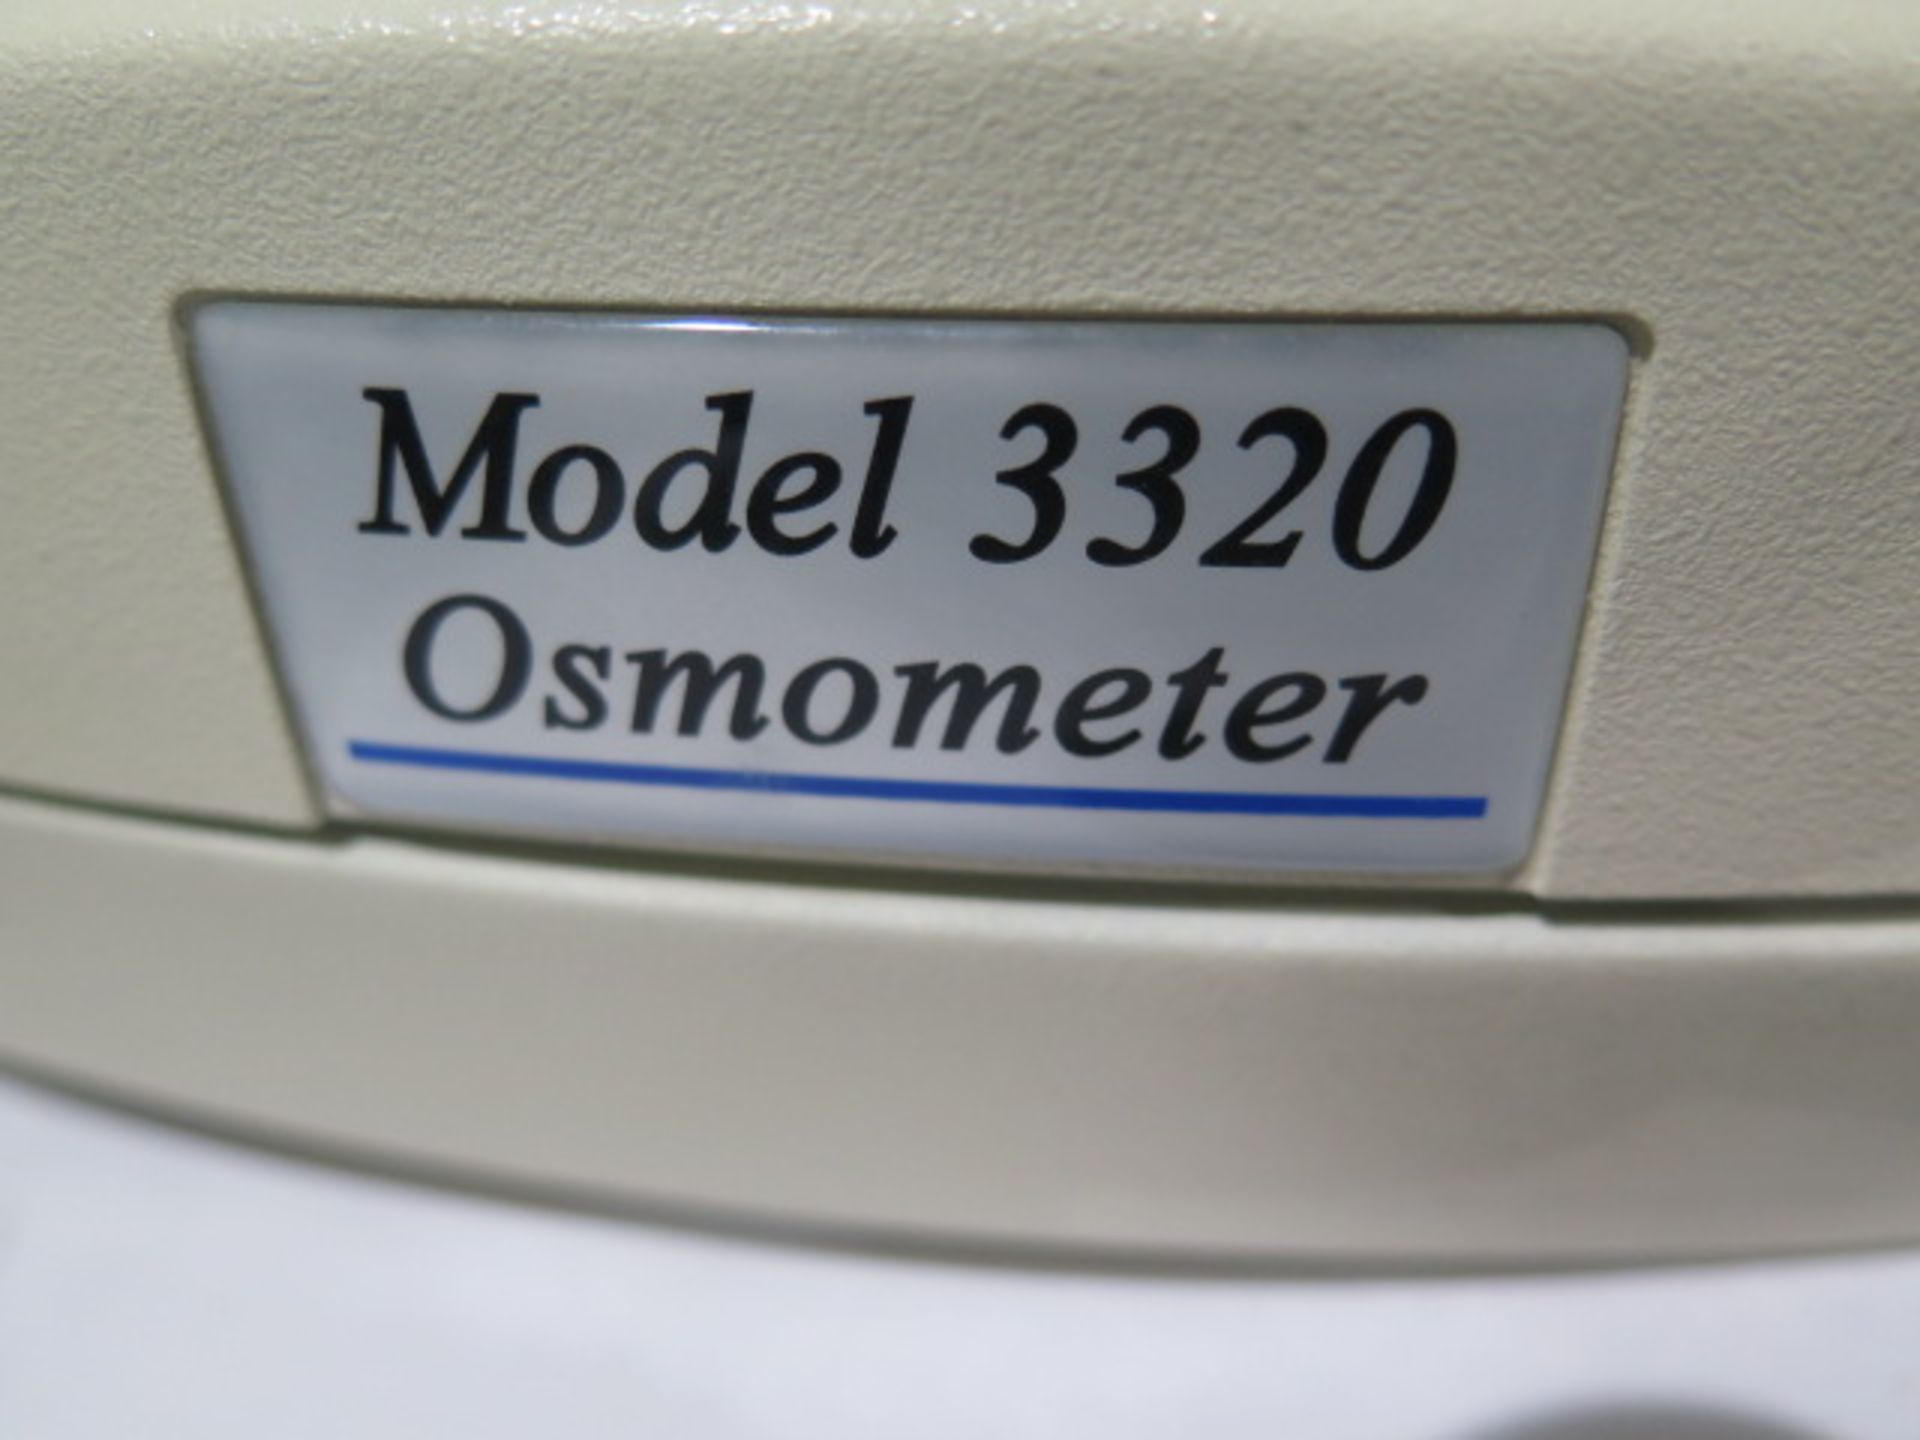 Advanced Instruments mdl. 3220 Osmometer s/n 06040381A (SOLD AS-IS - NO WARRANTY) - Image 6 of 7